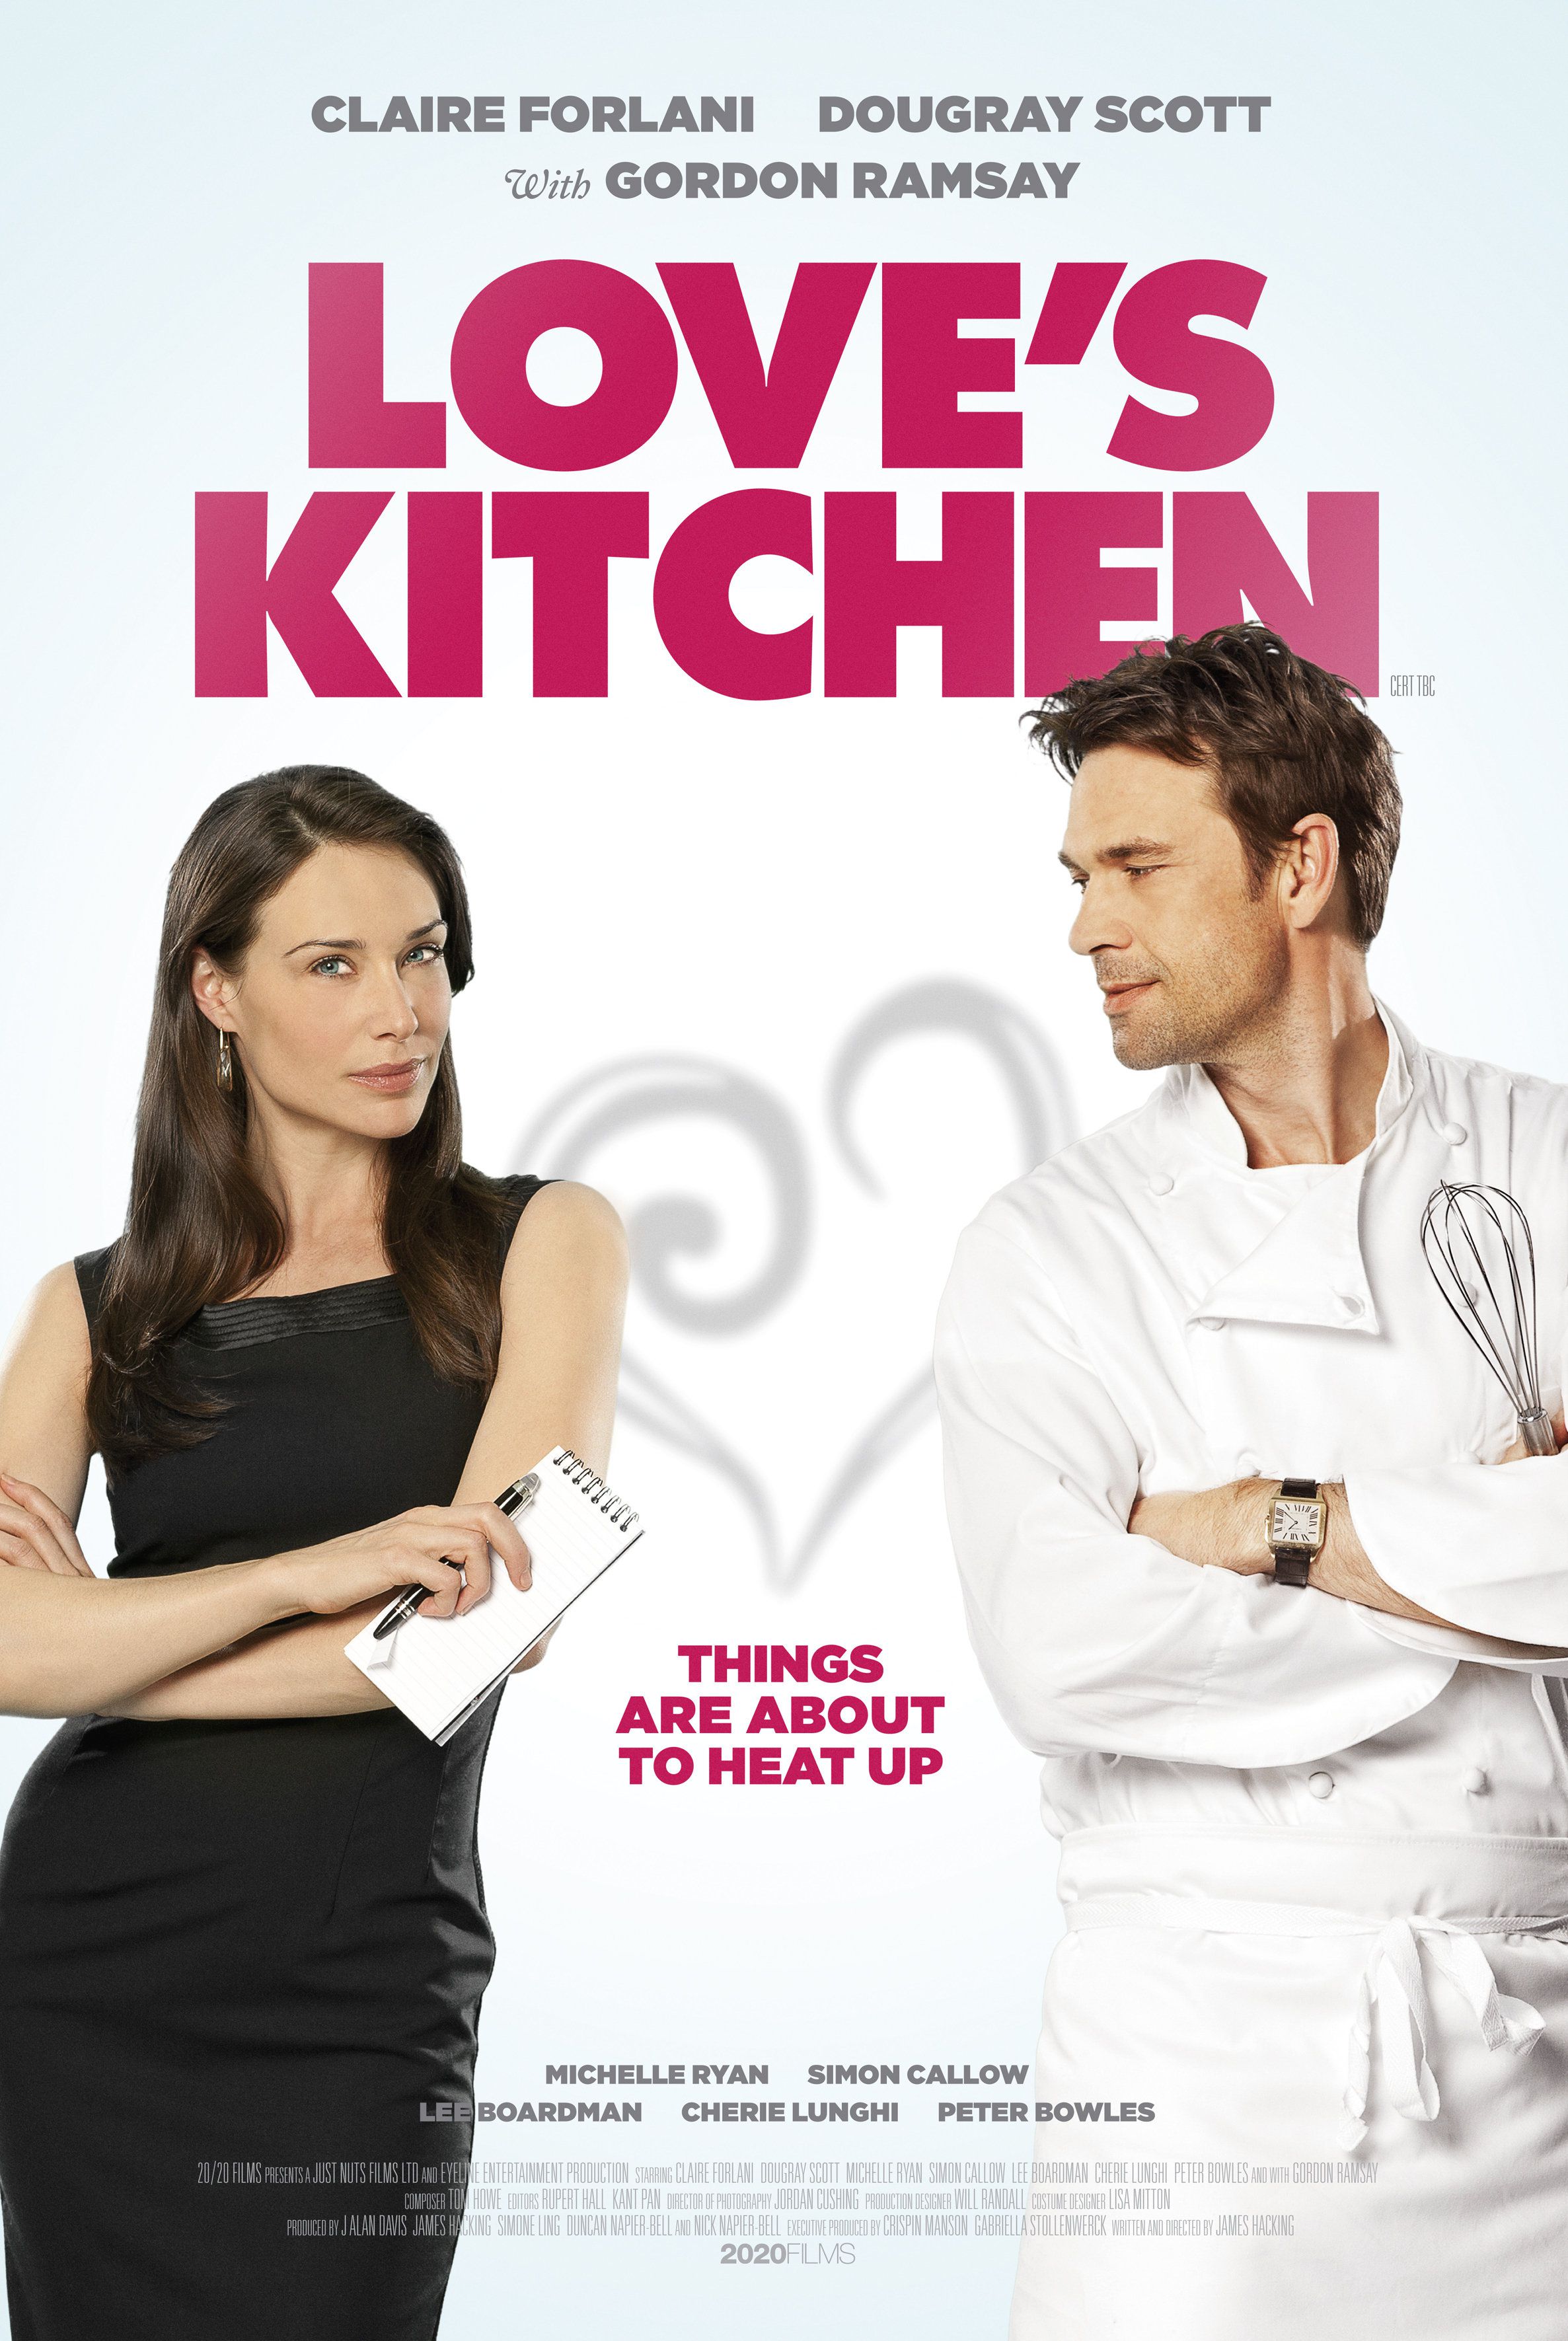 Love's Kitchen - Film (2011) streaming VF gratuit complet